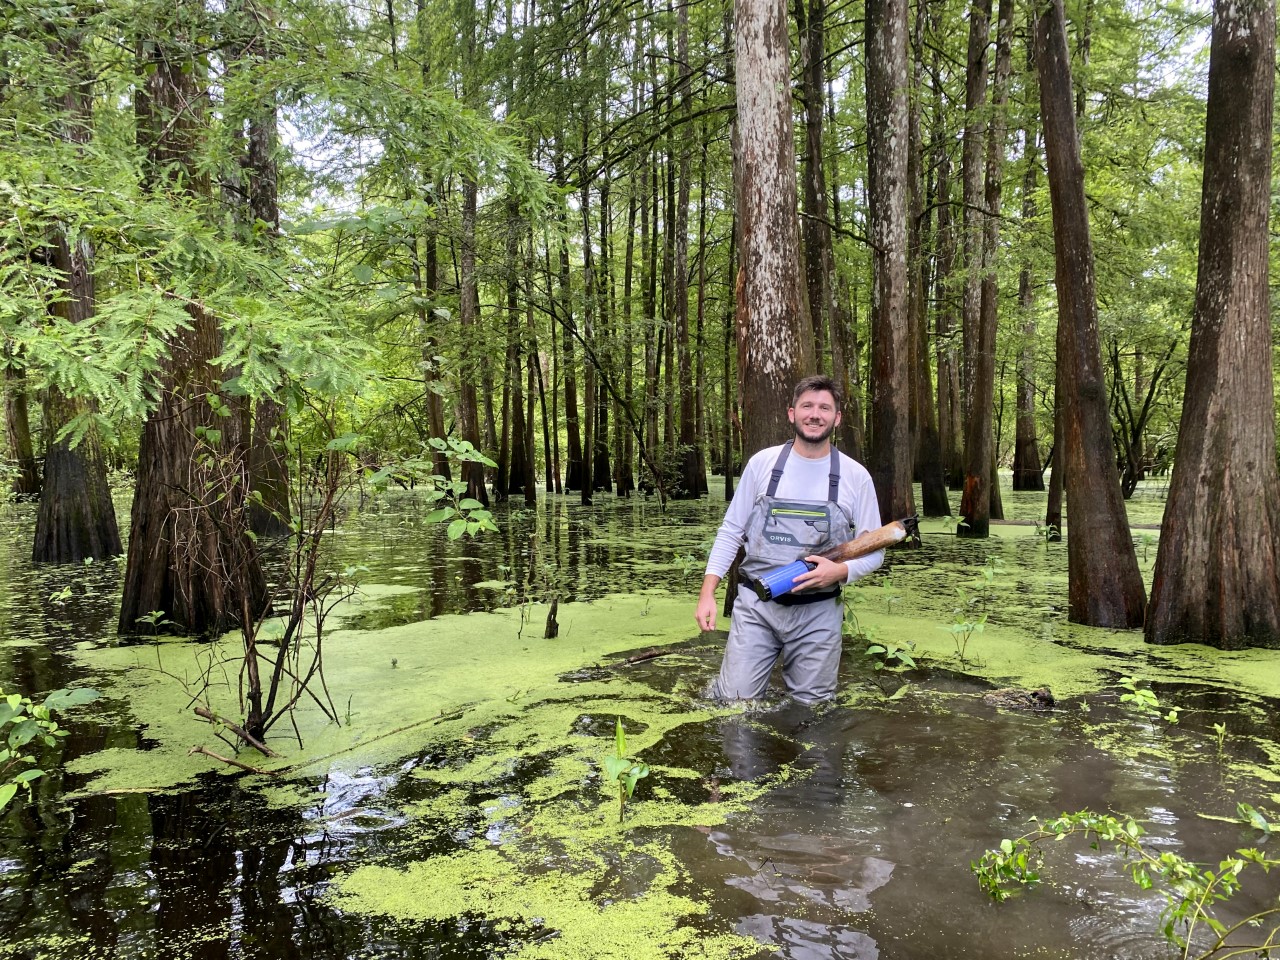 a man in waders stands in thigh-high marsh water